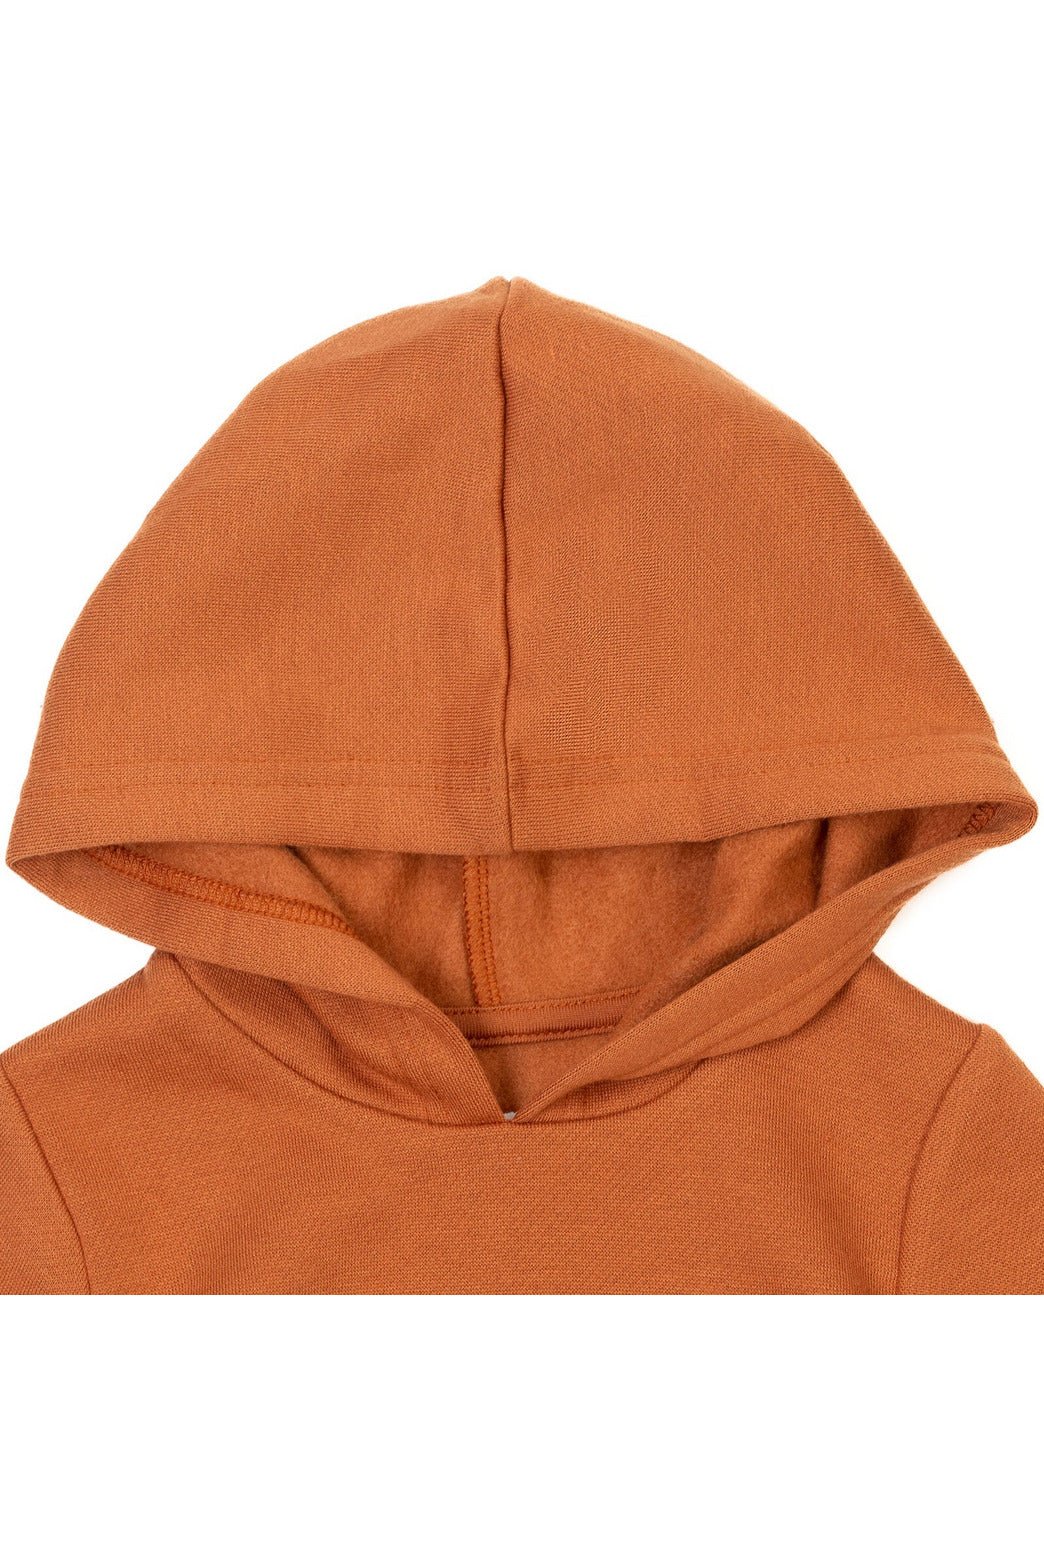 E.T. the Extra-Terrestrial Fleece Pullover Hoodie Infant to Toddler - imagikids